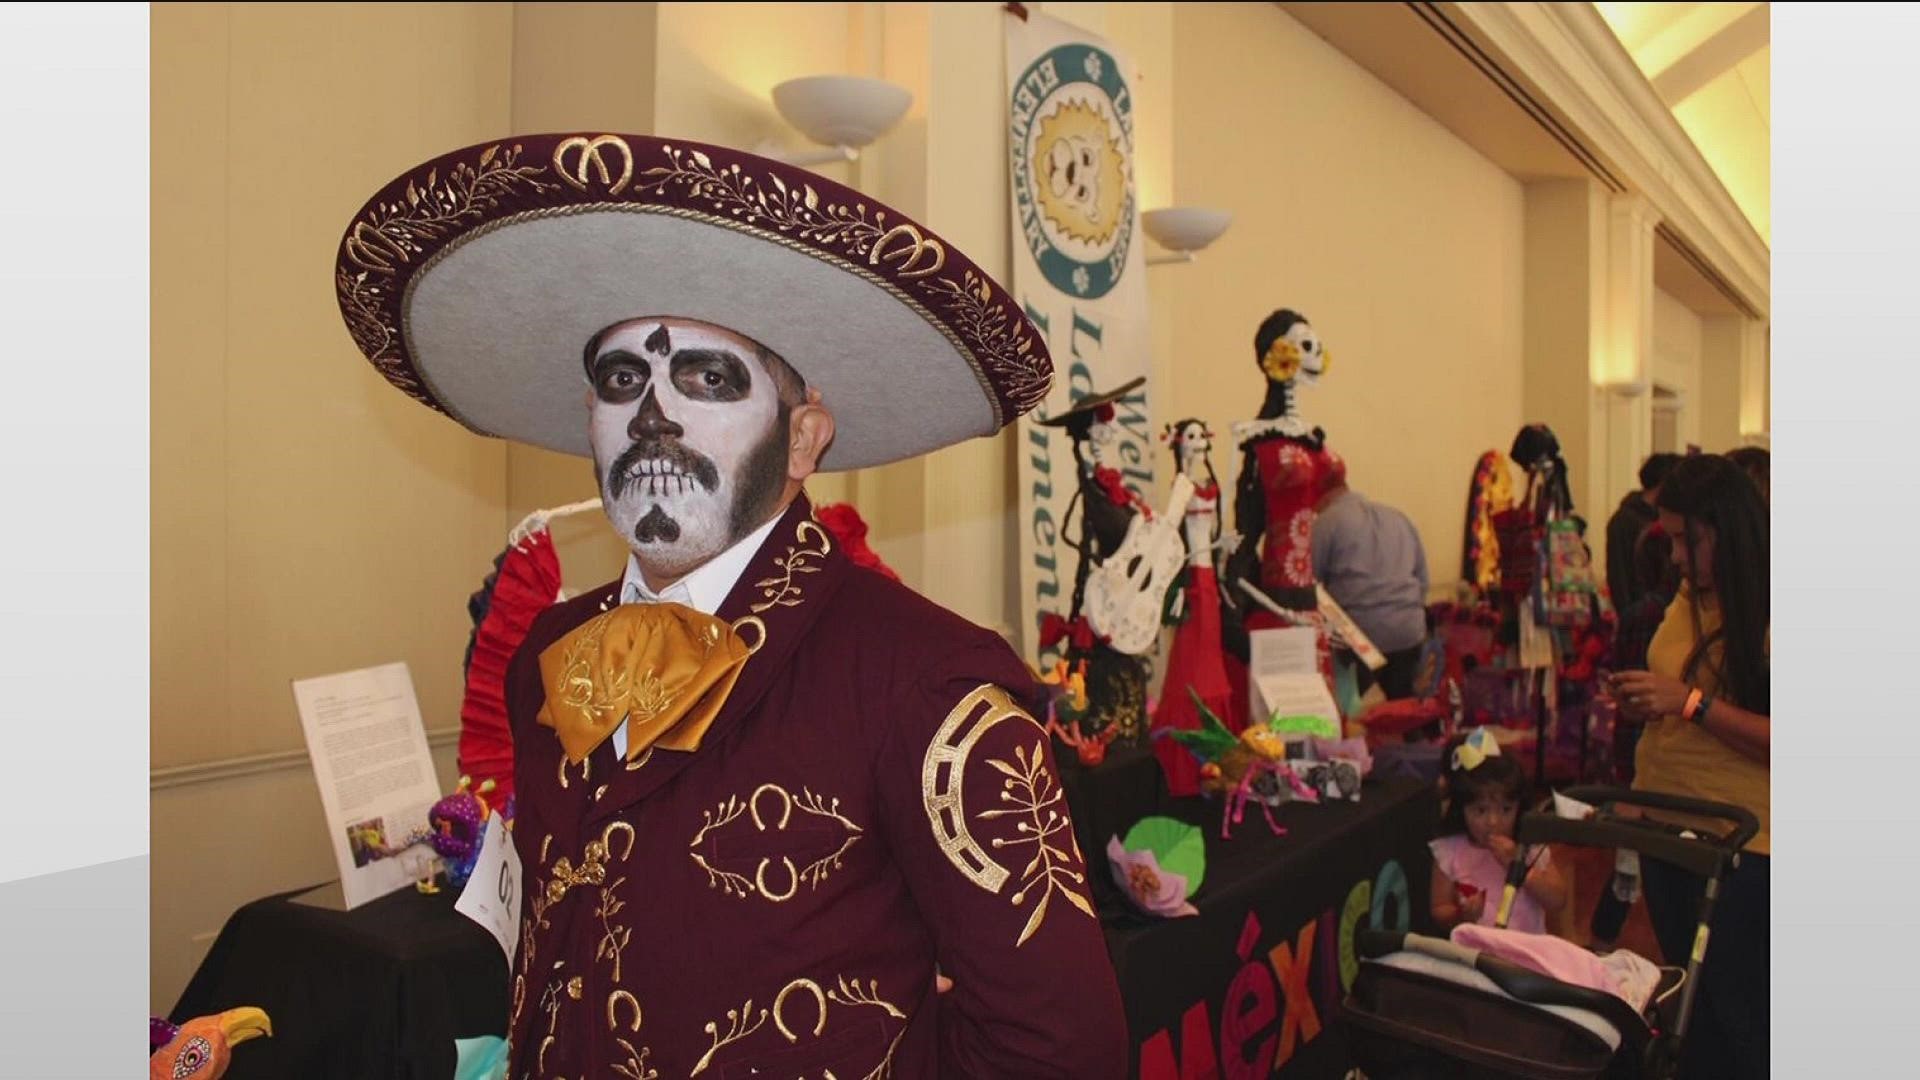 The Day of the Dead Festival will take place Nov. 6.